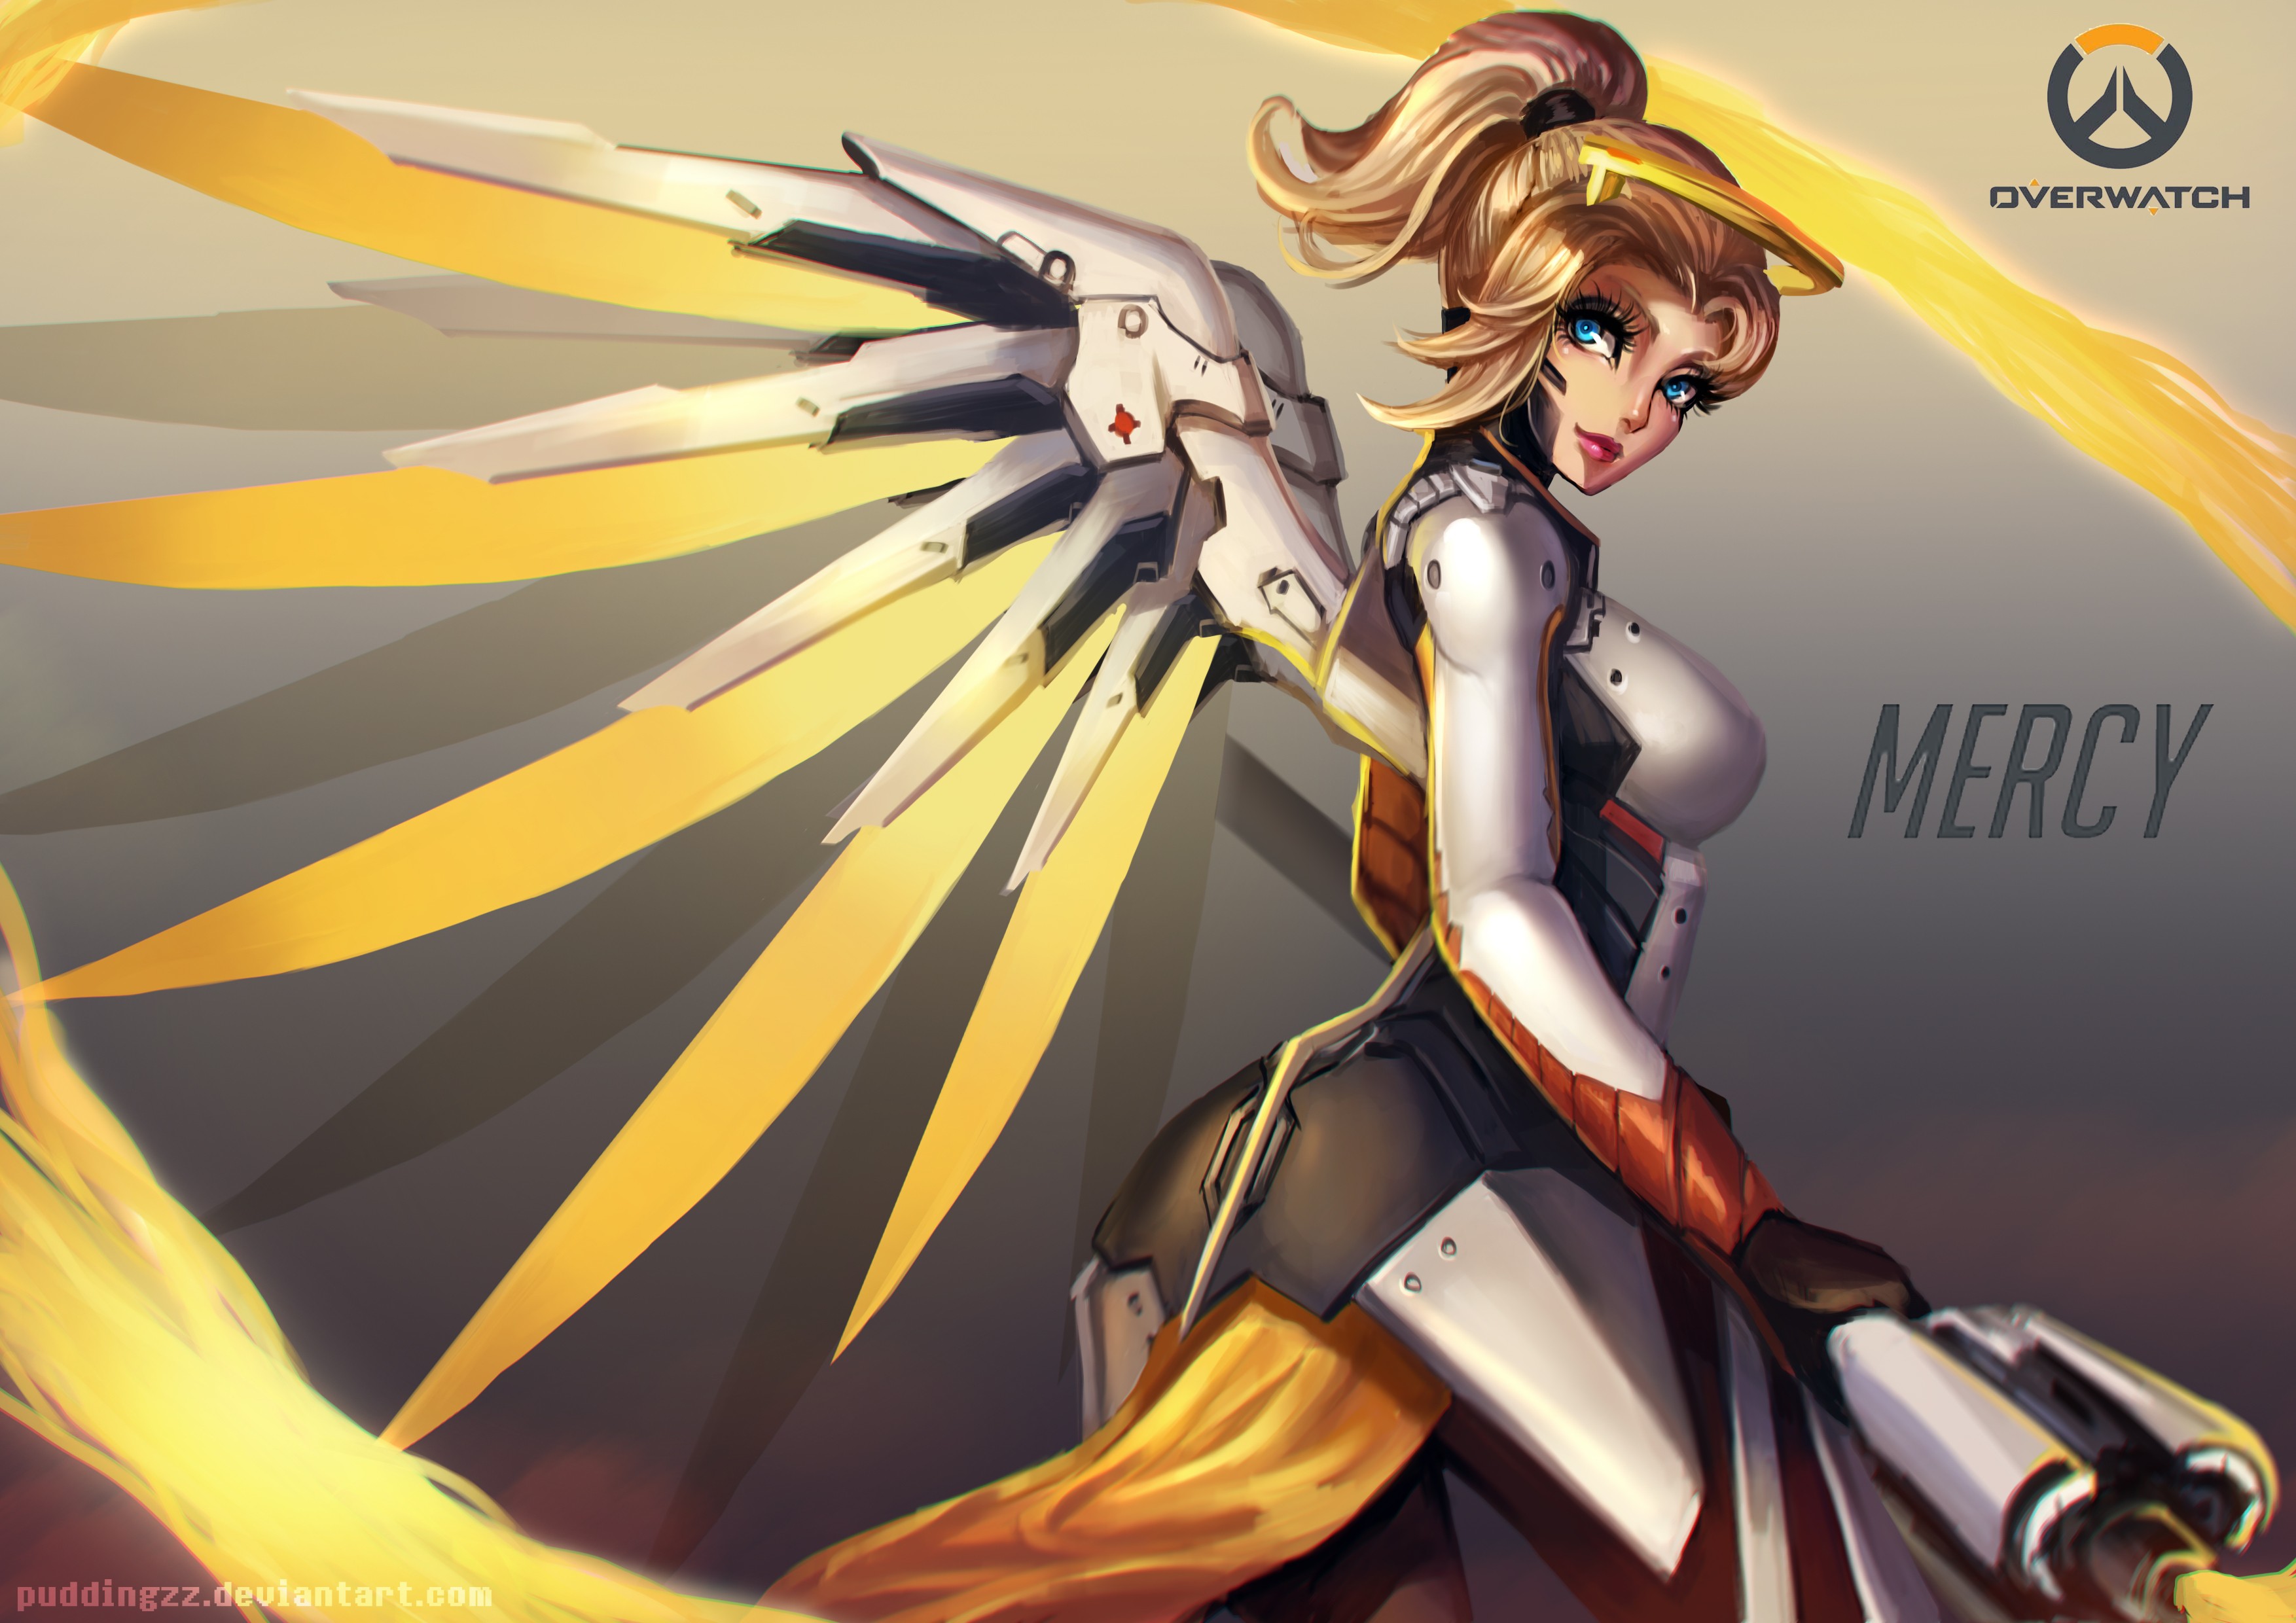 Anime 3508x2480 anime Overwatch Mercy (Overwatch) wings weapon blue eyes boobs big boobs long hair lipstick Pixiv fan art video game girls video game characters PC gaming girls with guns